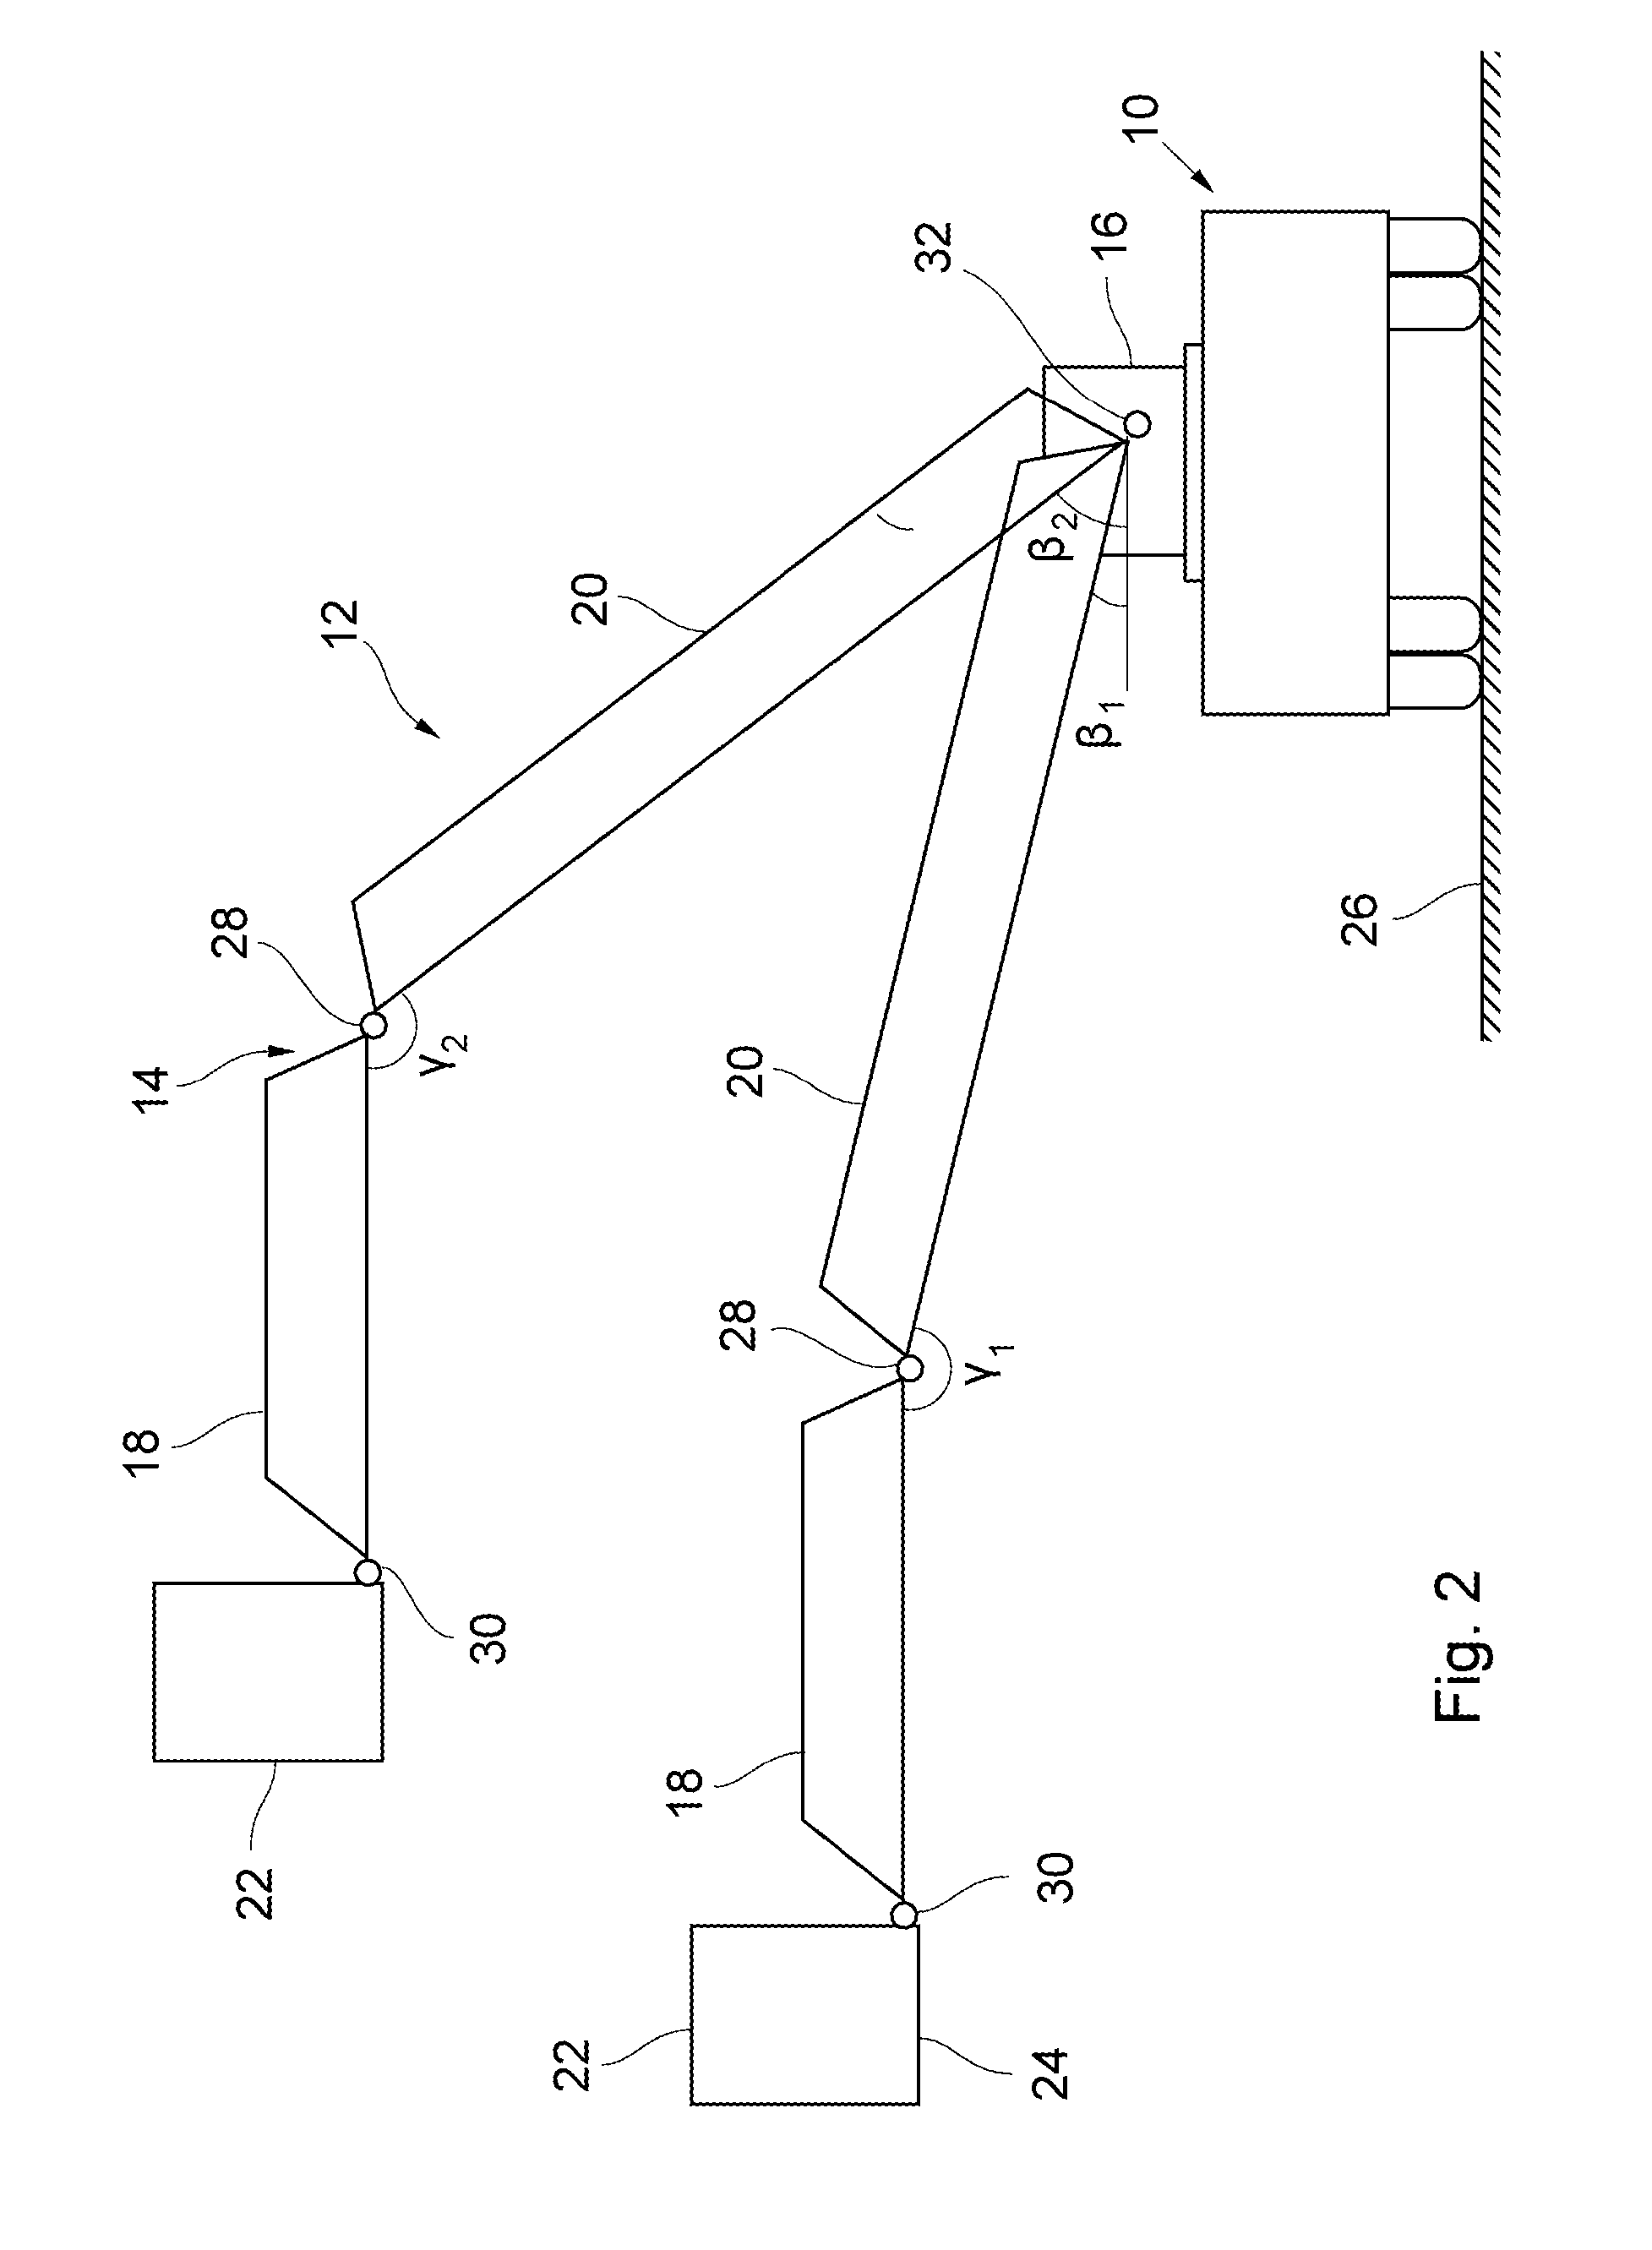 Method for controlling an articulated turntable ladder of a rescue vehicle